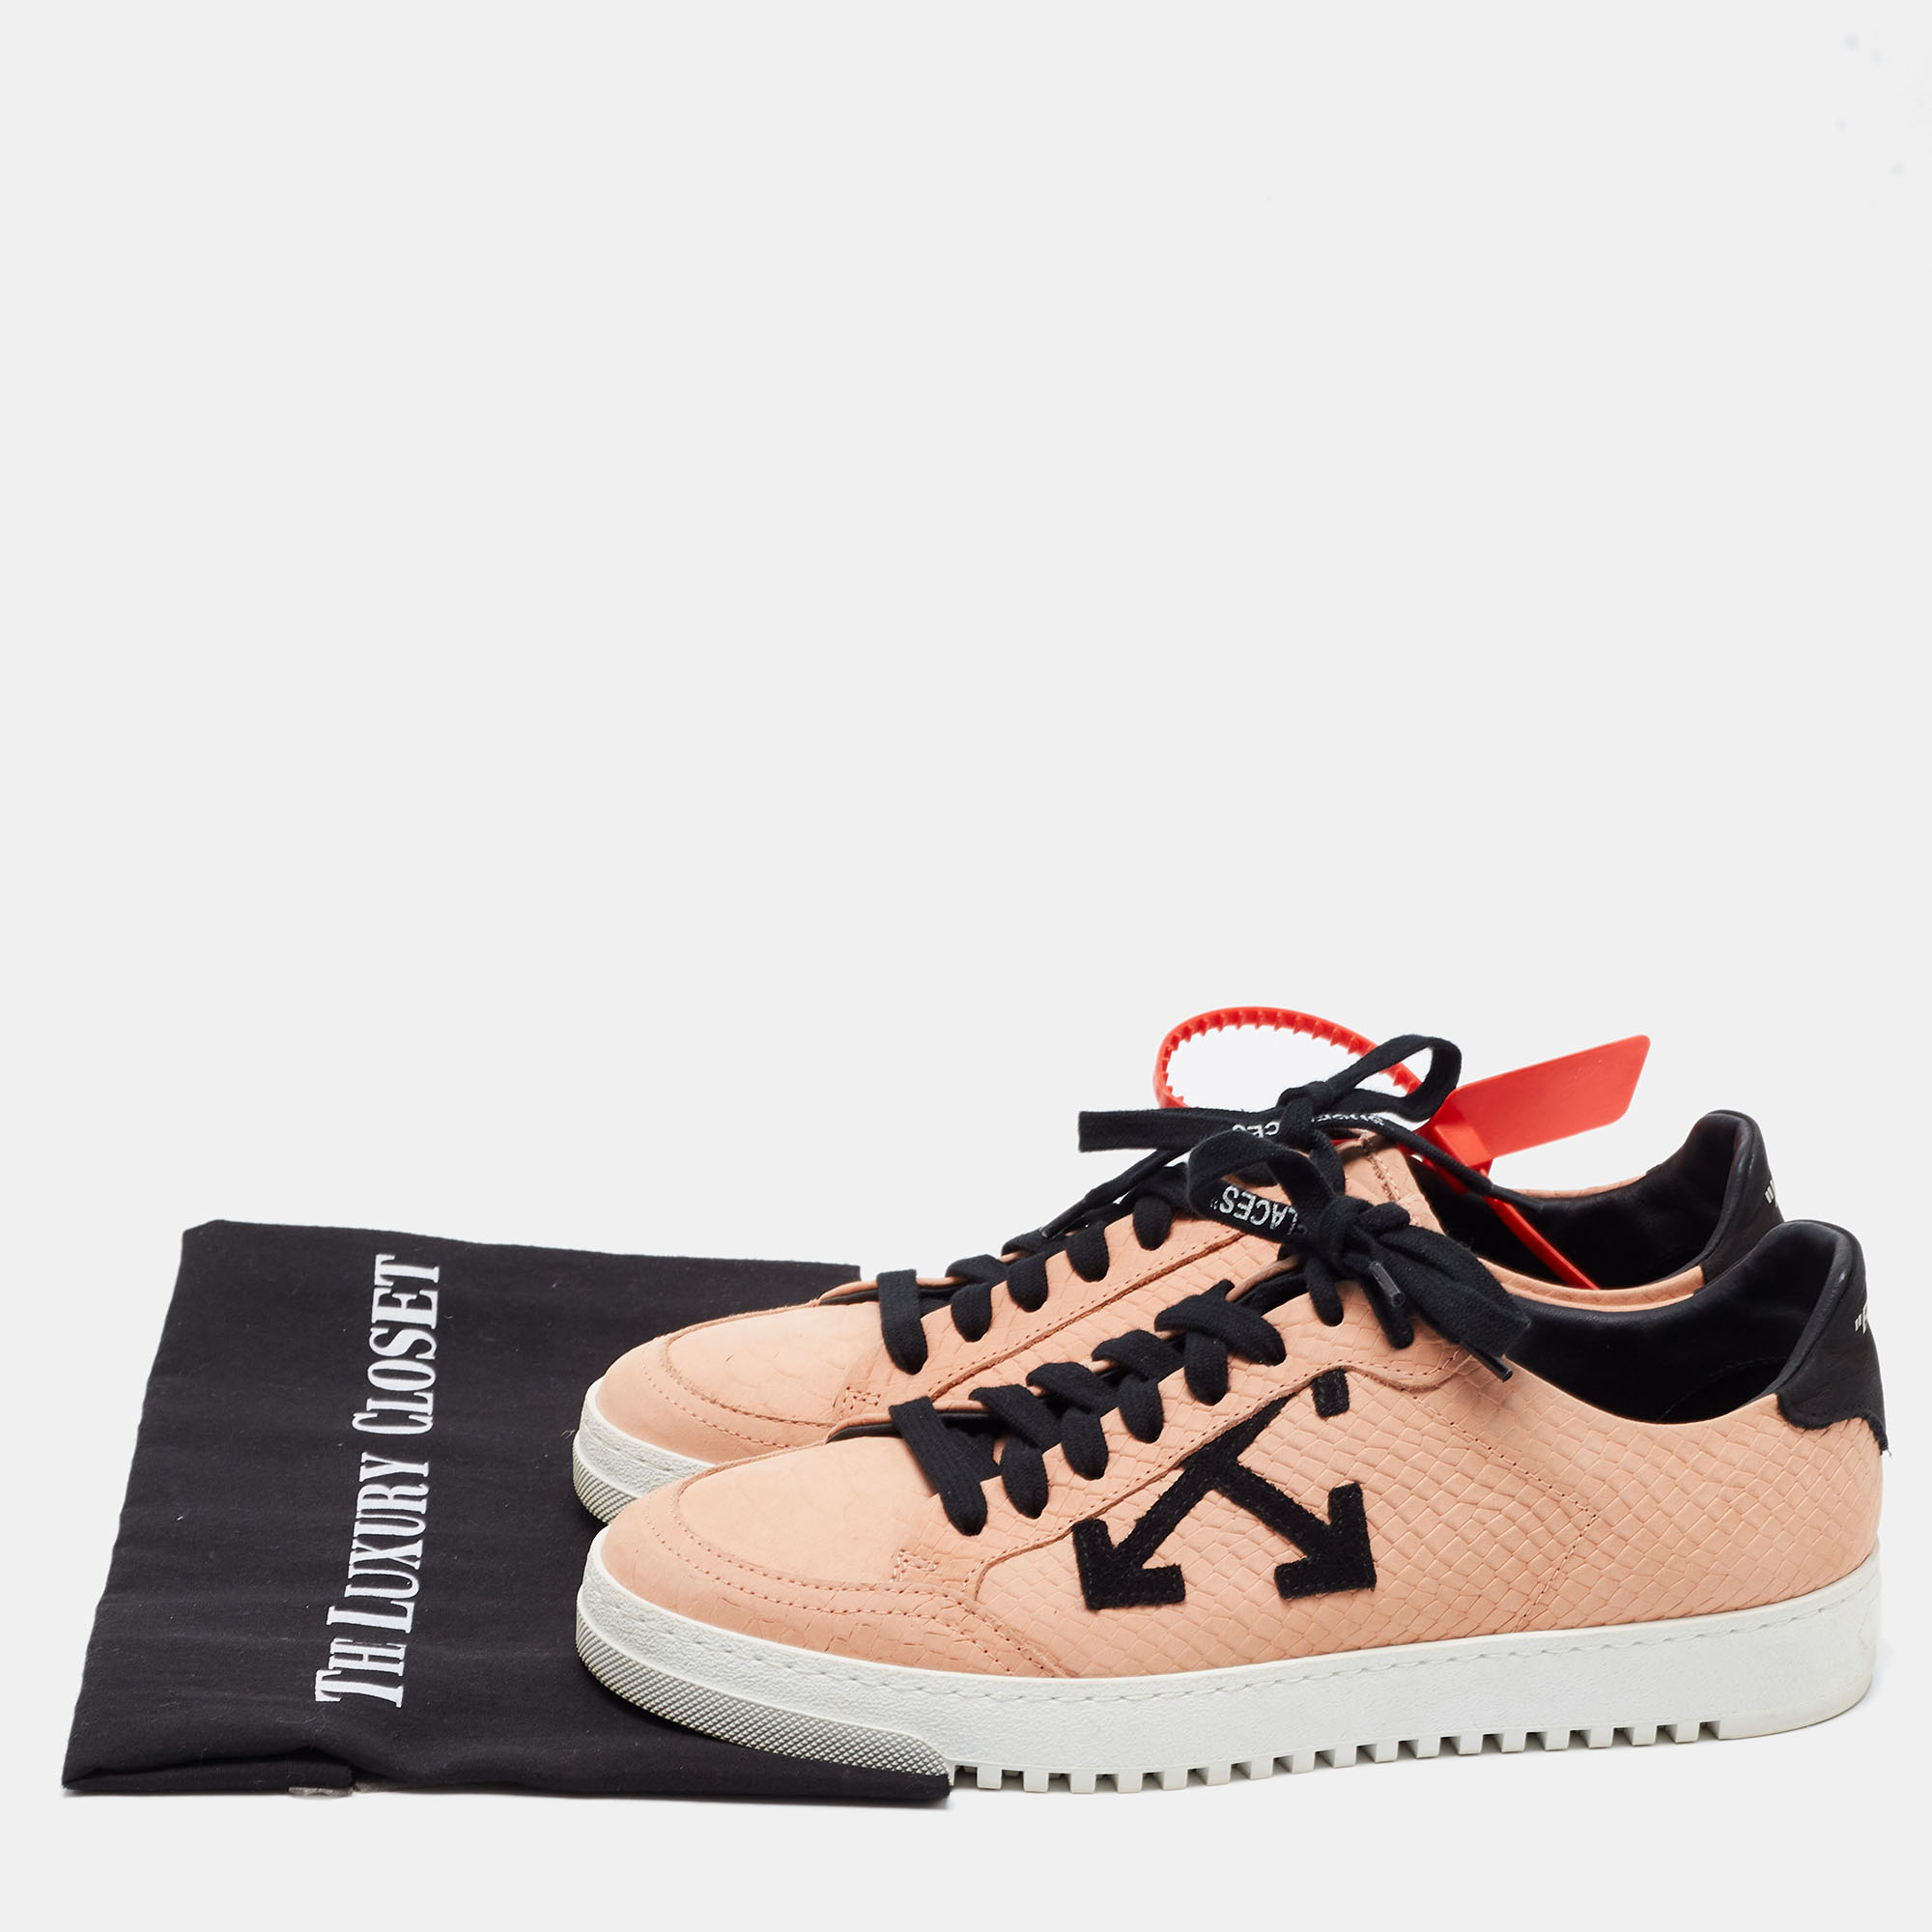 Off-White Pink Python Embossed Leather Low 2.0 Sneakers Size 39